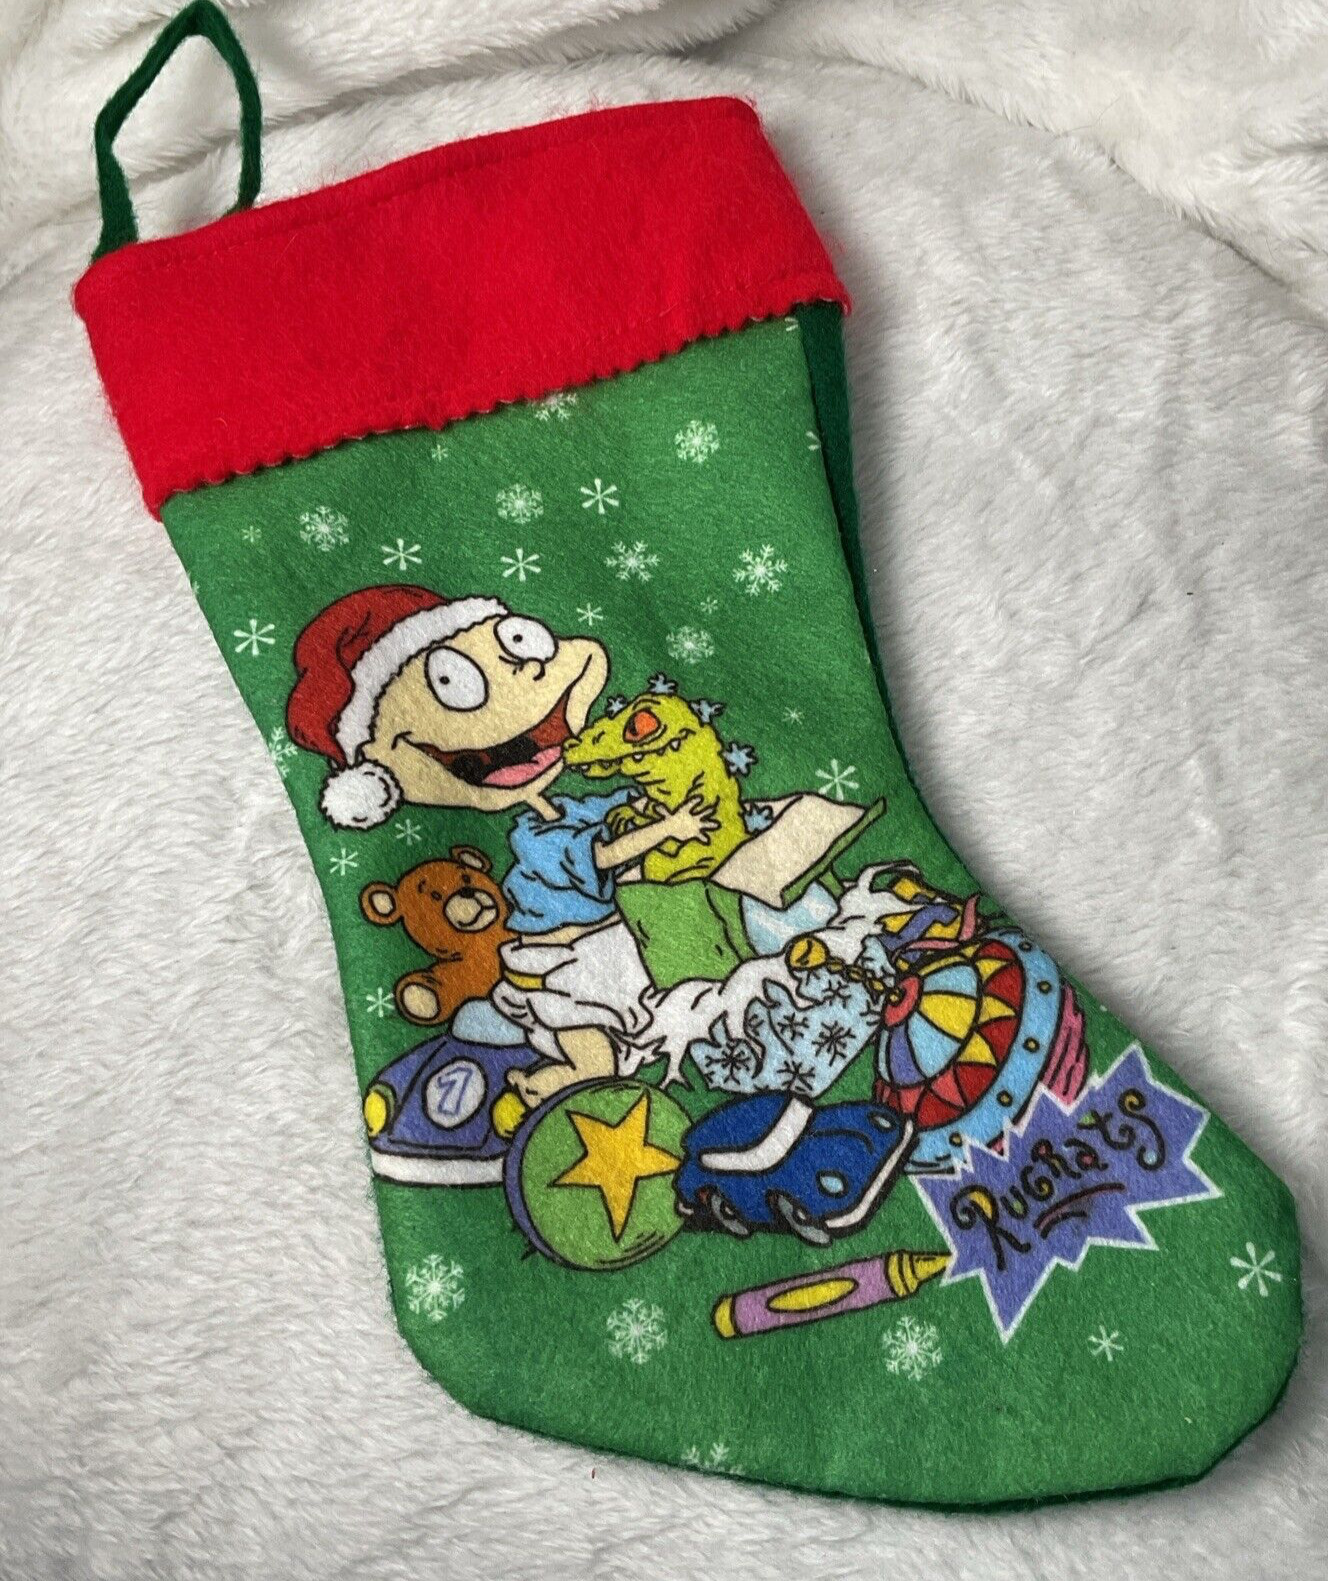 Vintage 1990s Rugrats Felt Christmas Stocking Tommy Pickles Nickelodeon